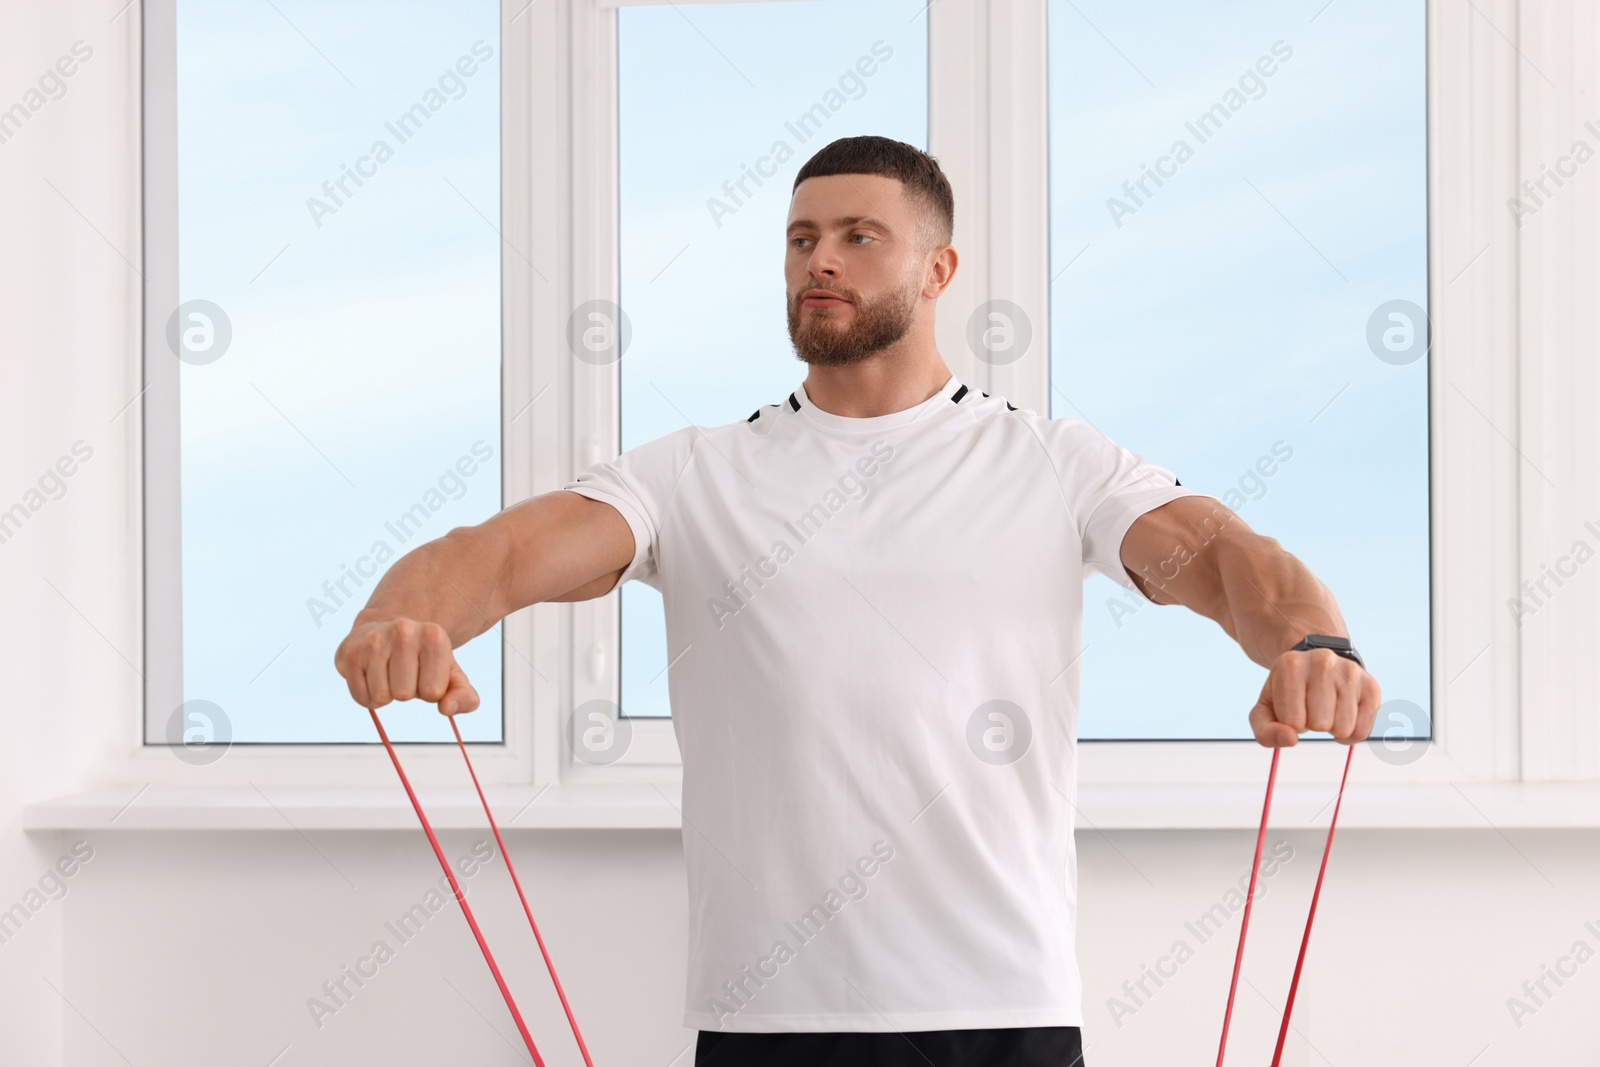 Photo of Athletic man doing exercise with elastic resistance band indoors